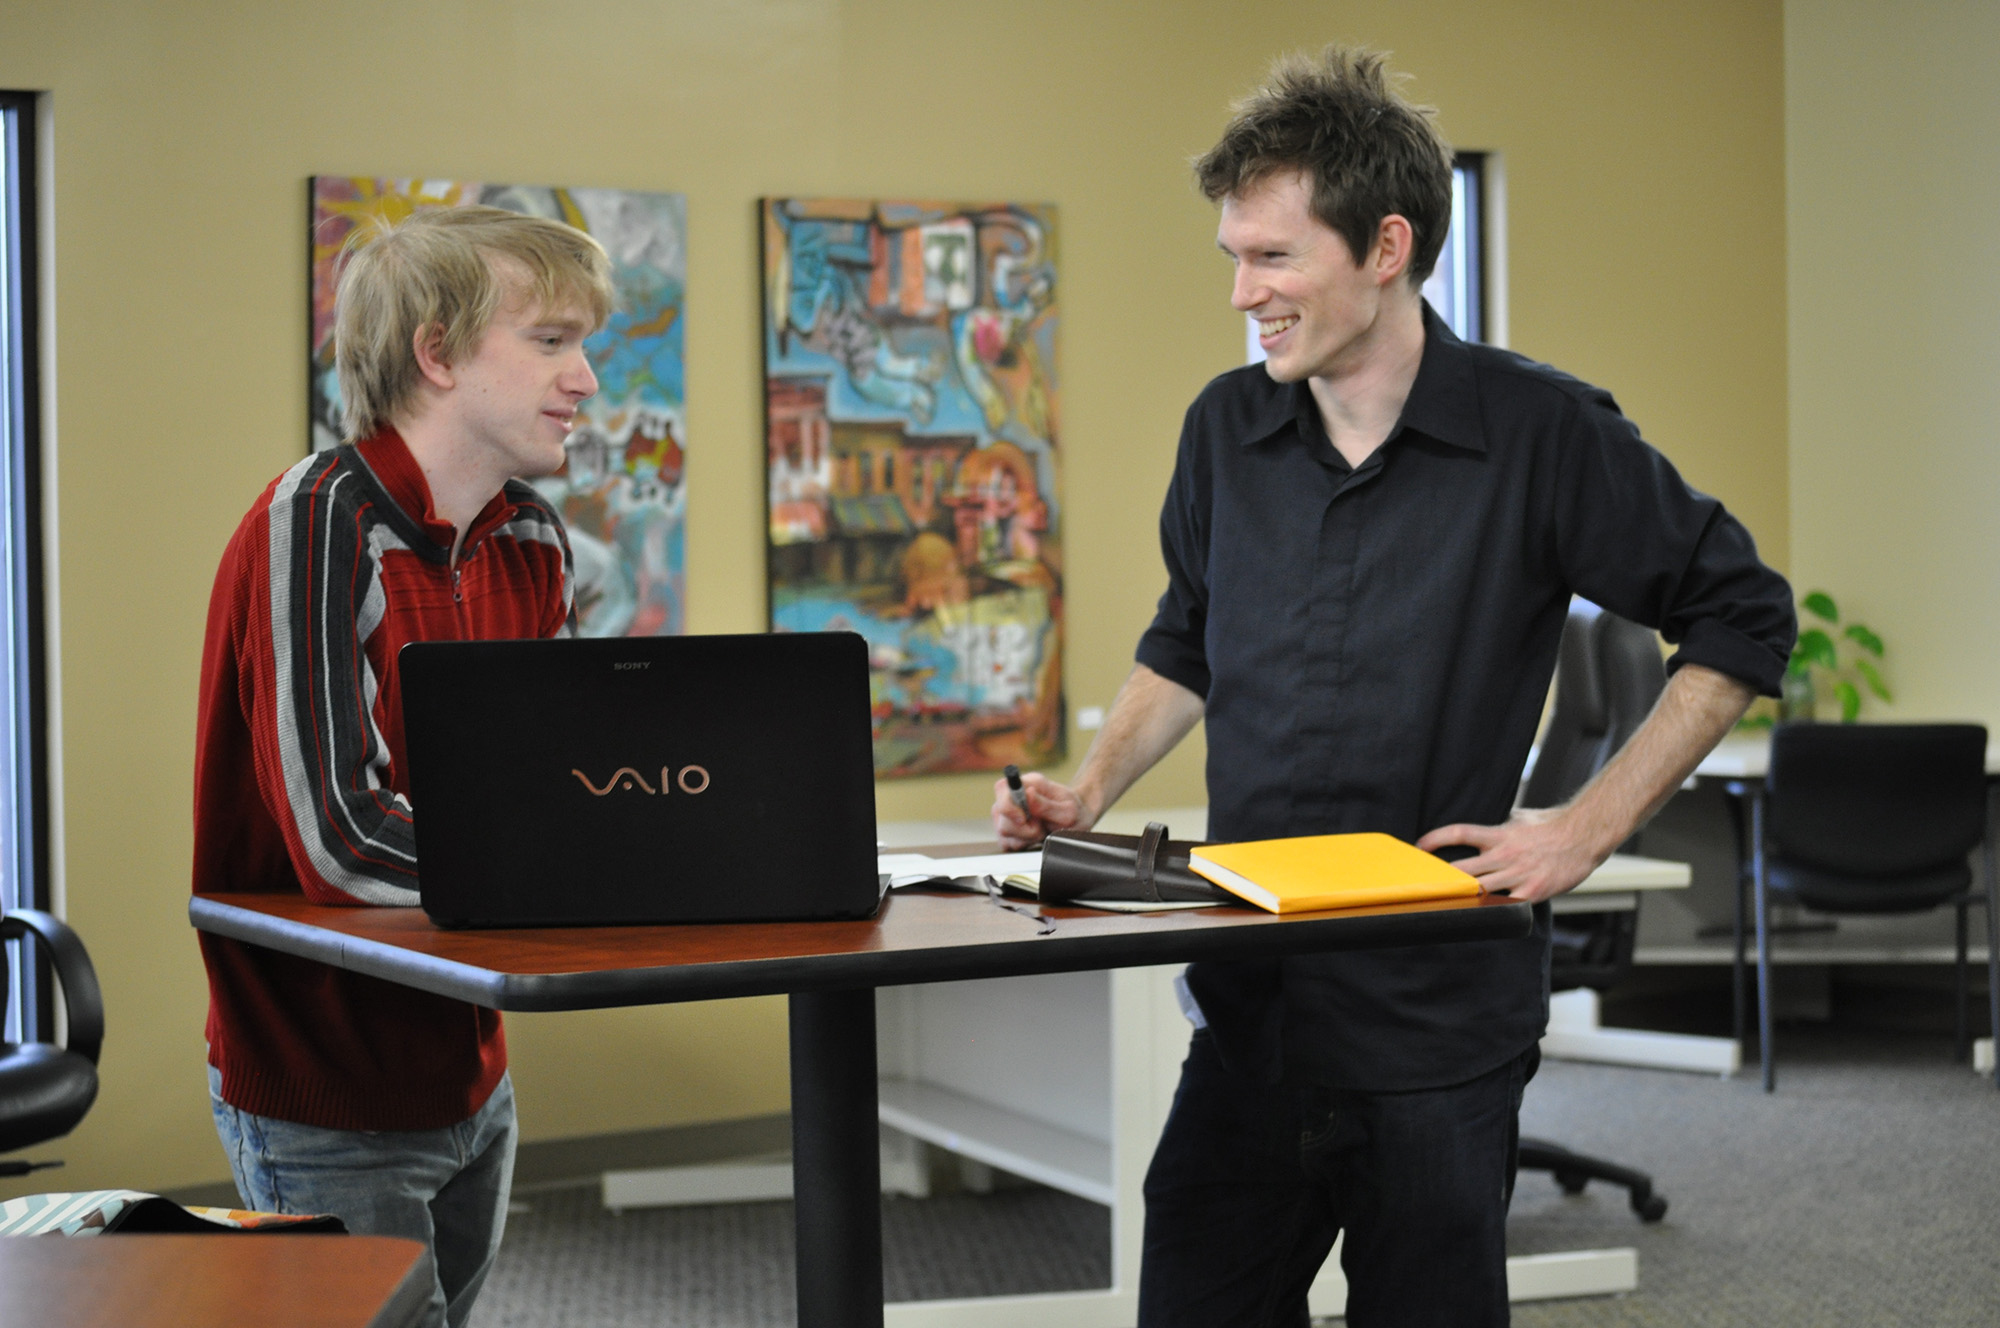 Micah Miller-Eshleman and Alan Smith laugh and work at one of the standing desks in their new studio